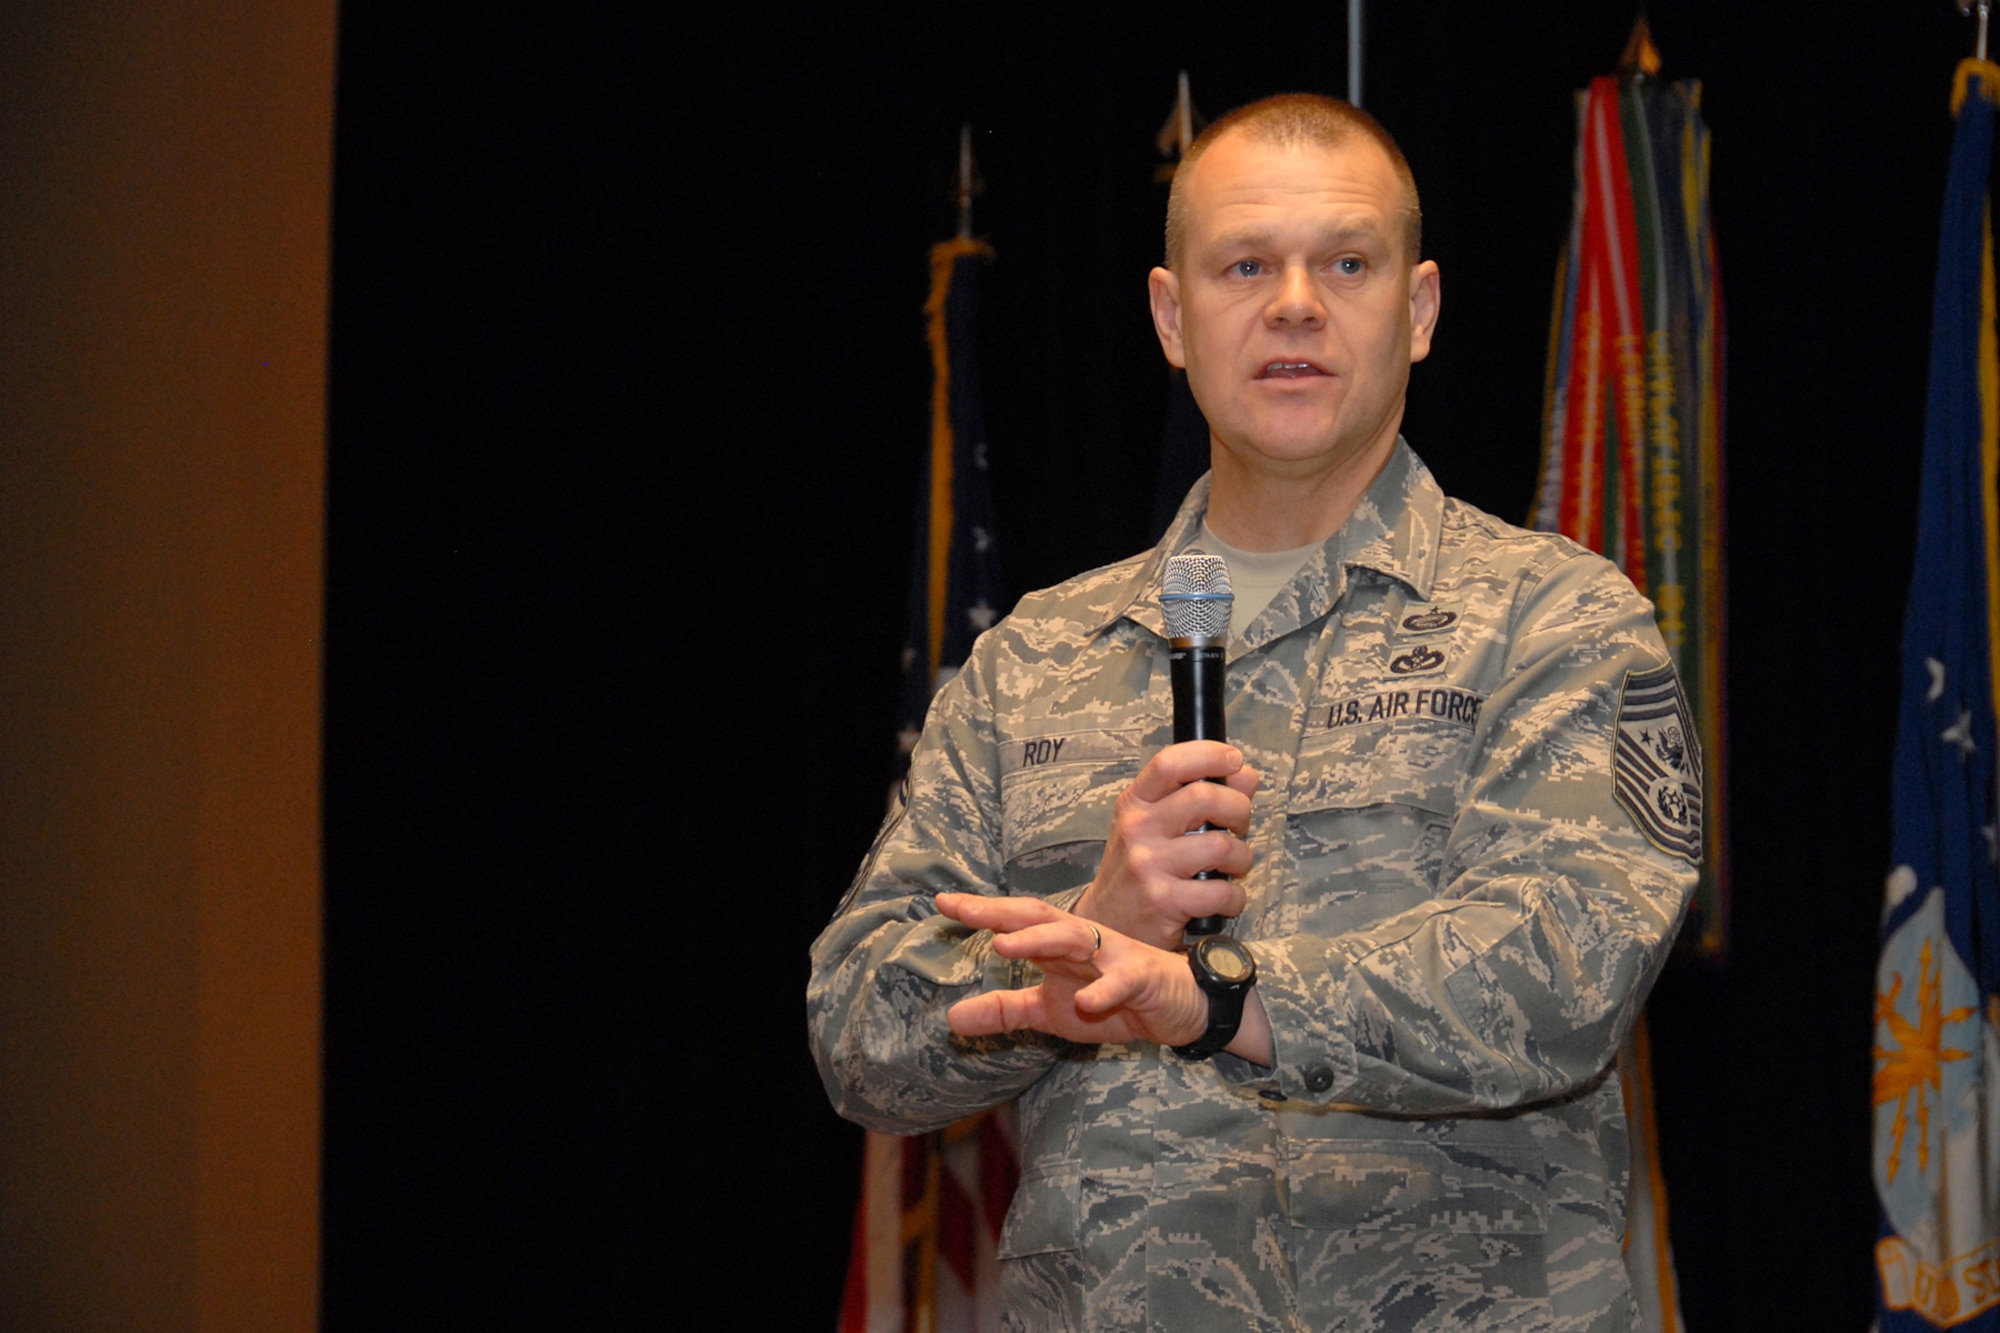 Chief Master Sergeant for the Air Force James A. Roy addressed approximately 360 Soldiers and Airmen at the third "Joint" Michigan National Guard Senior Noncommissioned Officer Conference Feb. 6, 2010 in Grand Rapids, Mich. Roy, a Monroe, Mich. native, represents the highest enlisted level of leadership for the Air Force. (USAF photo by MSgt. Clancey Pence)